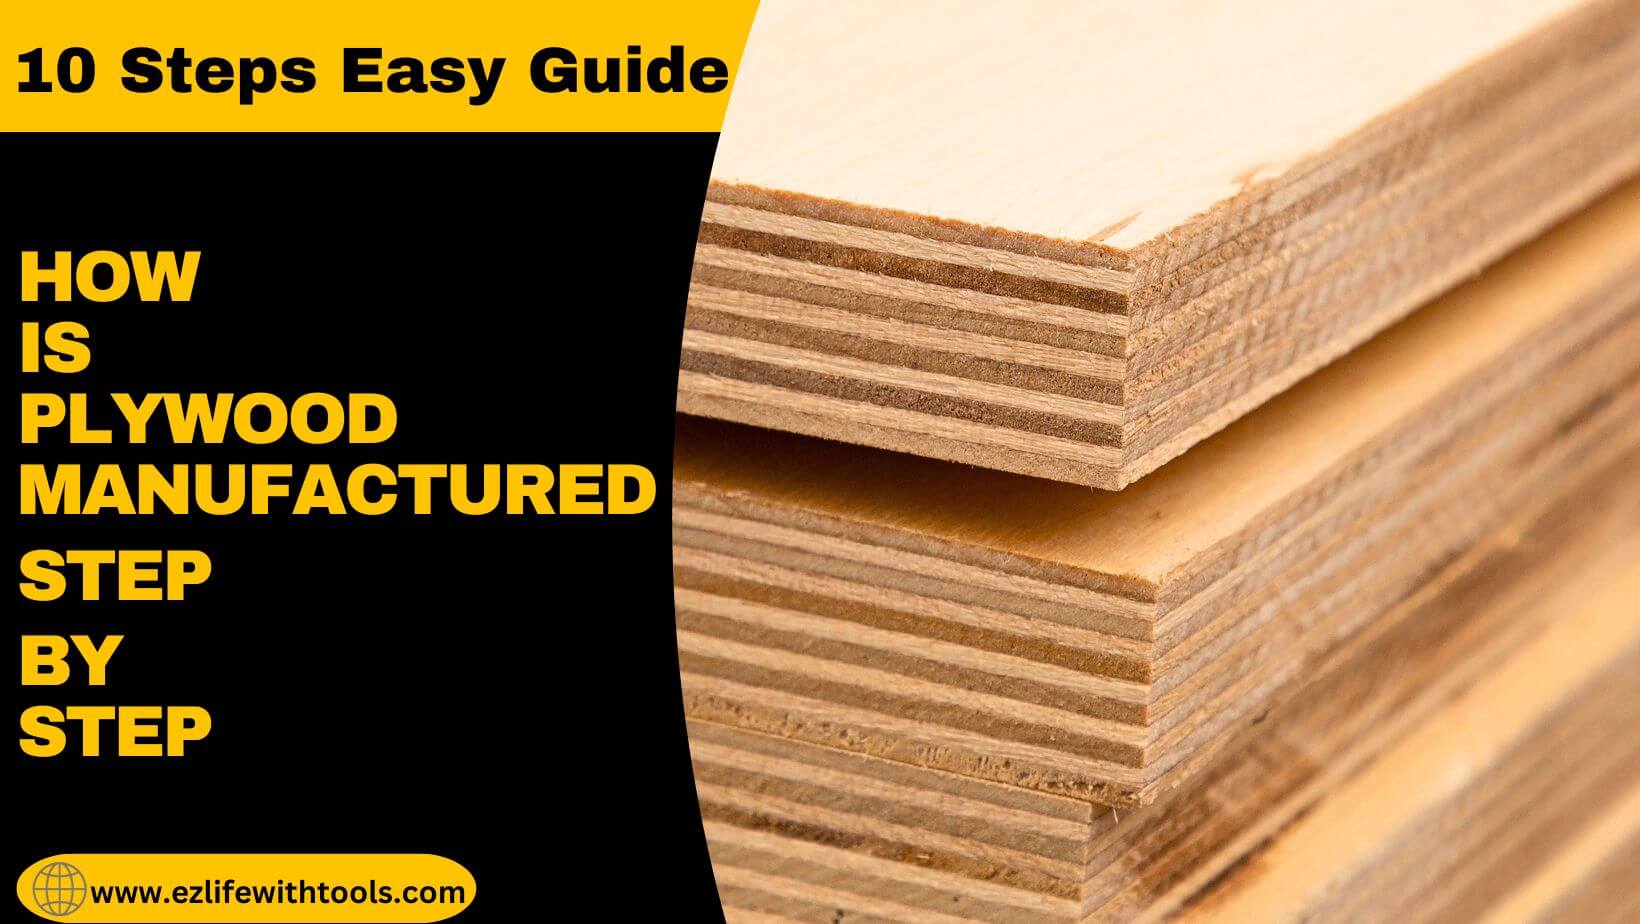 How is Plywood Manufactured Step by Step